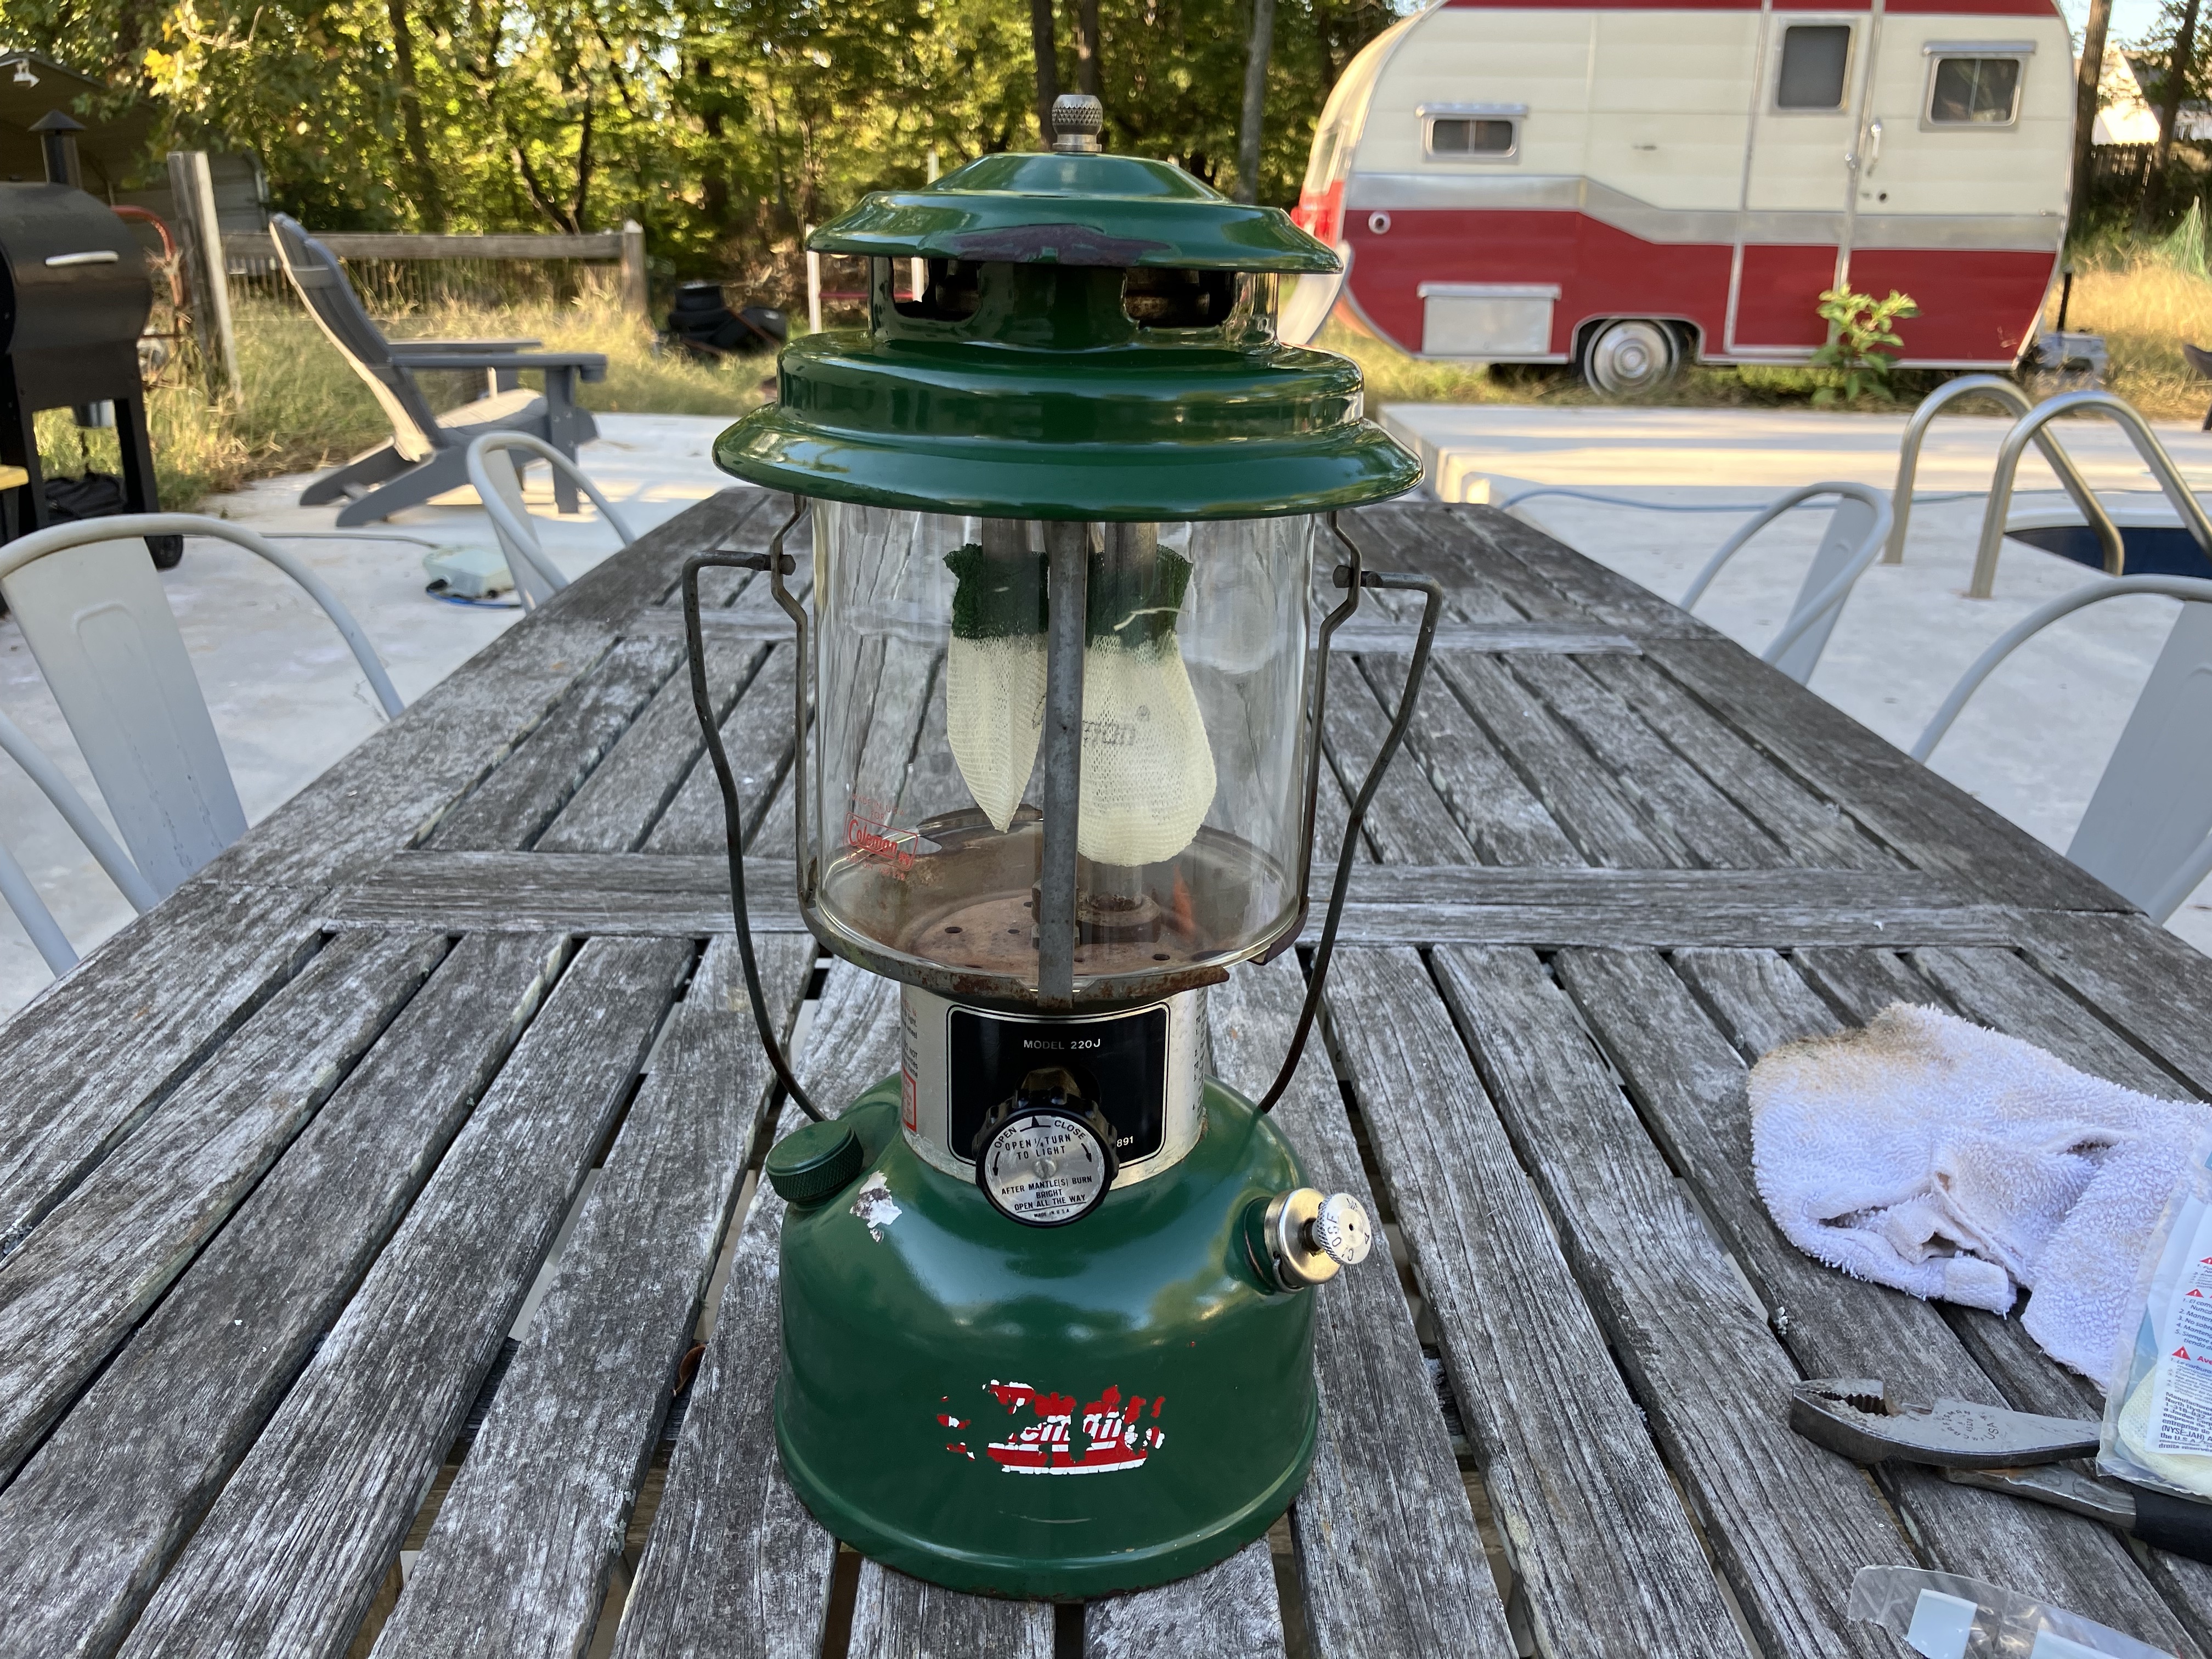 The 220J lantern with mantles and a new globe.